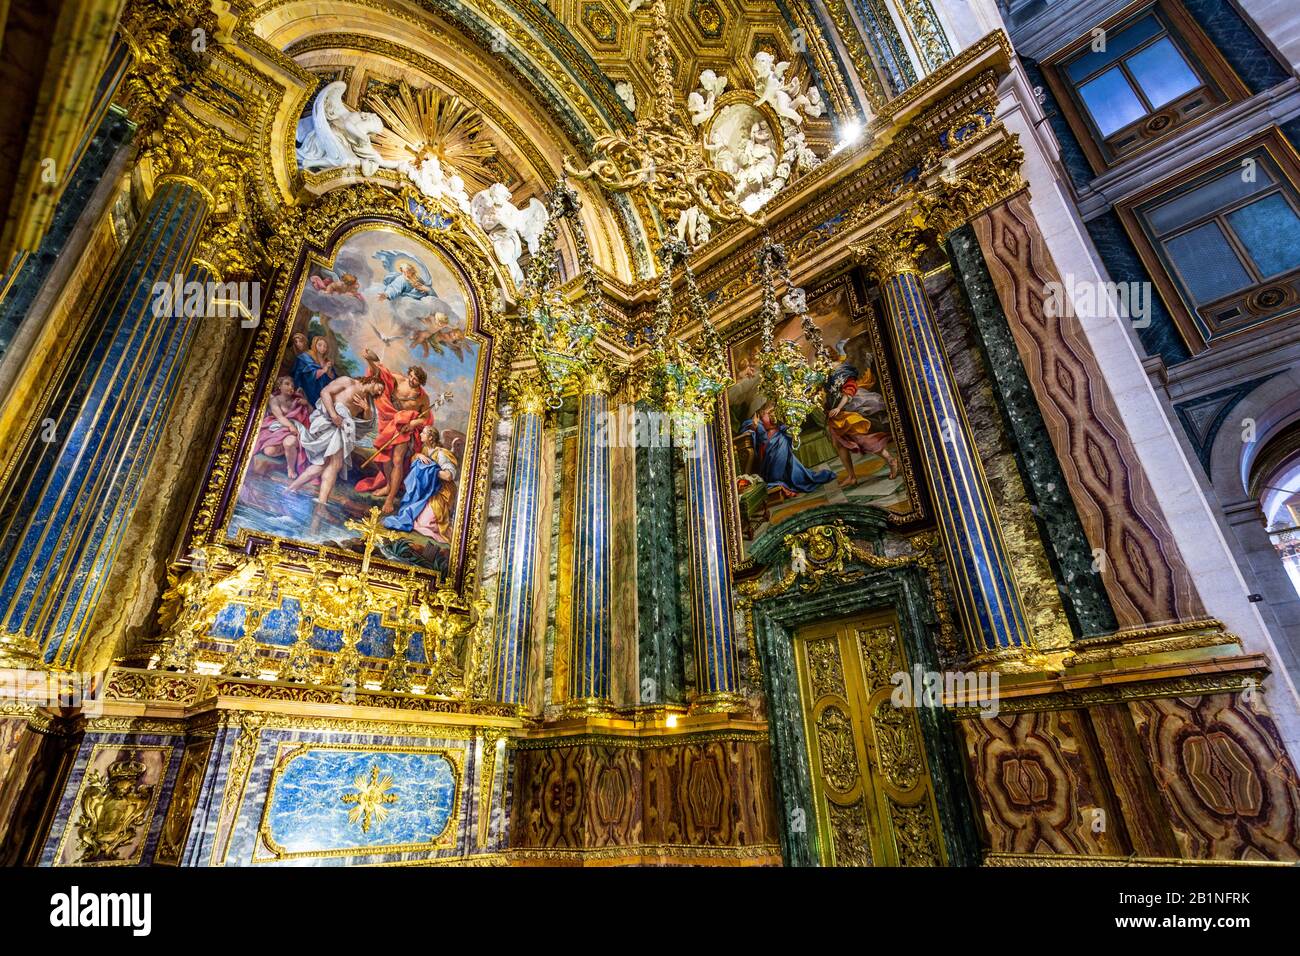 View of the Chapel of St John the Baptist inside the Jesuit Church of Saint Roch, in Bairro Alto, Lisbon, Portugal Stock Photo